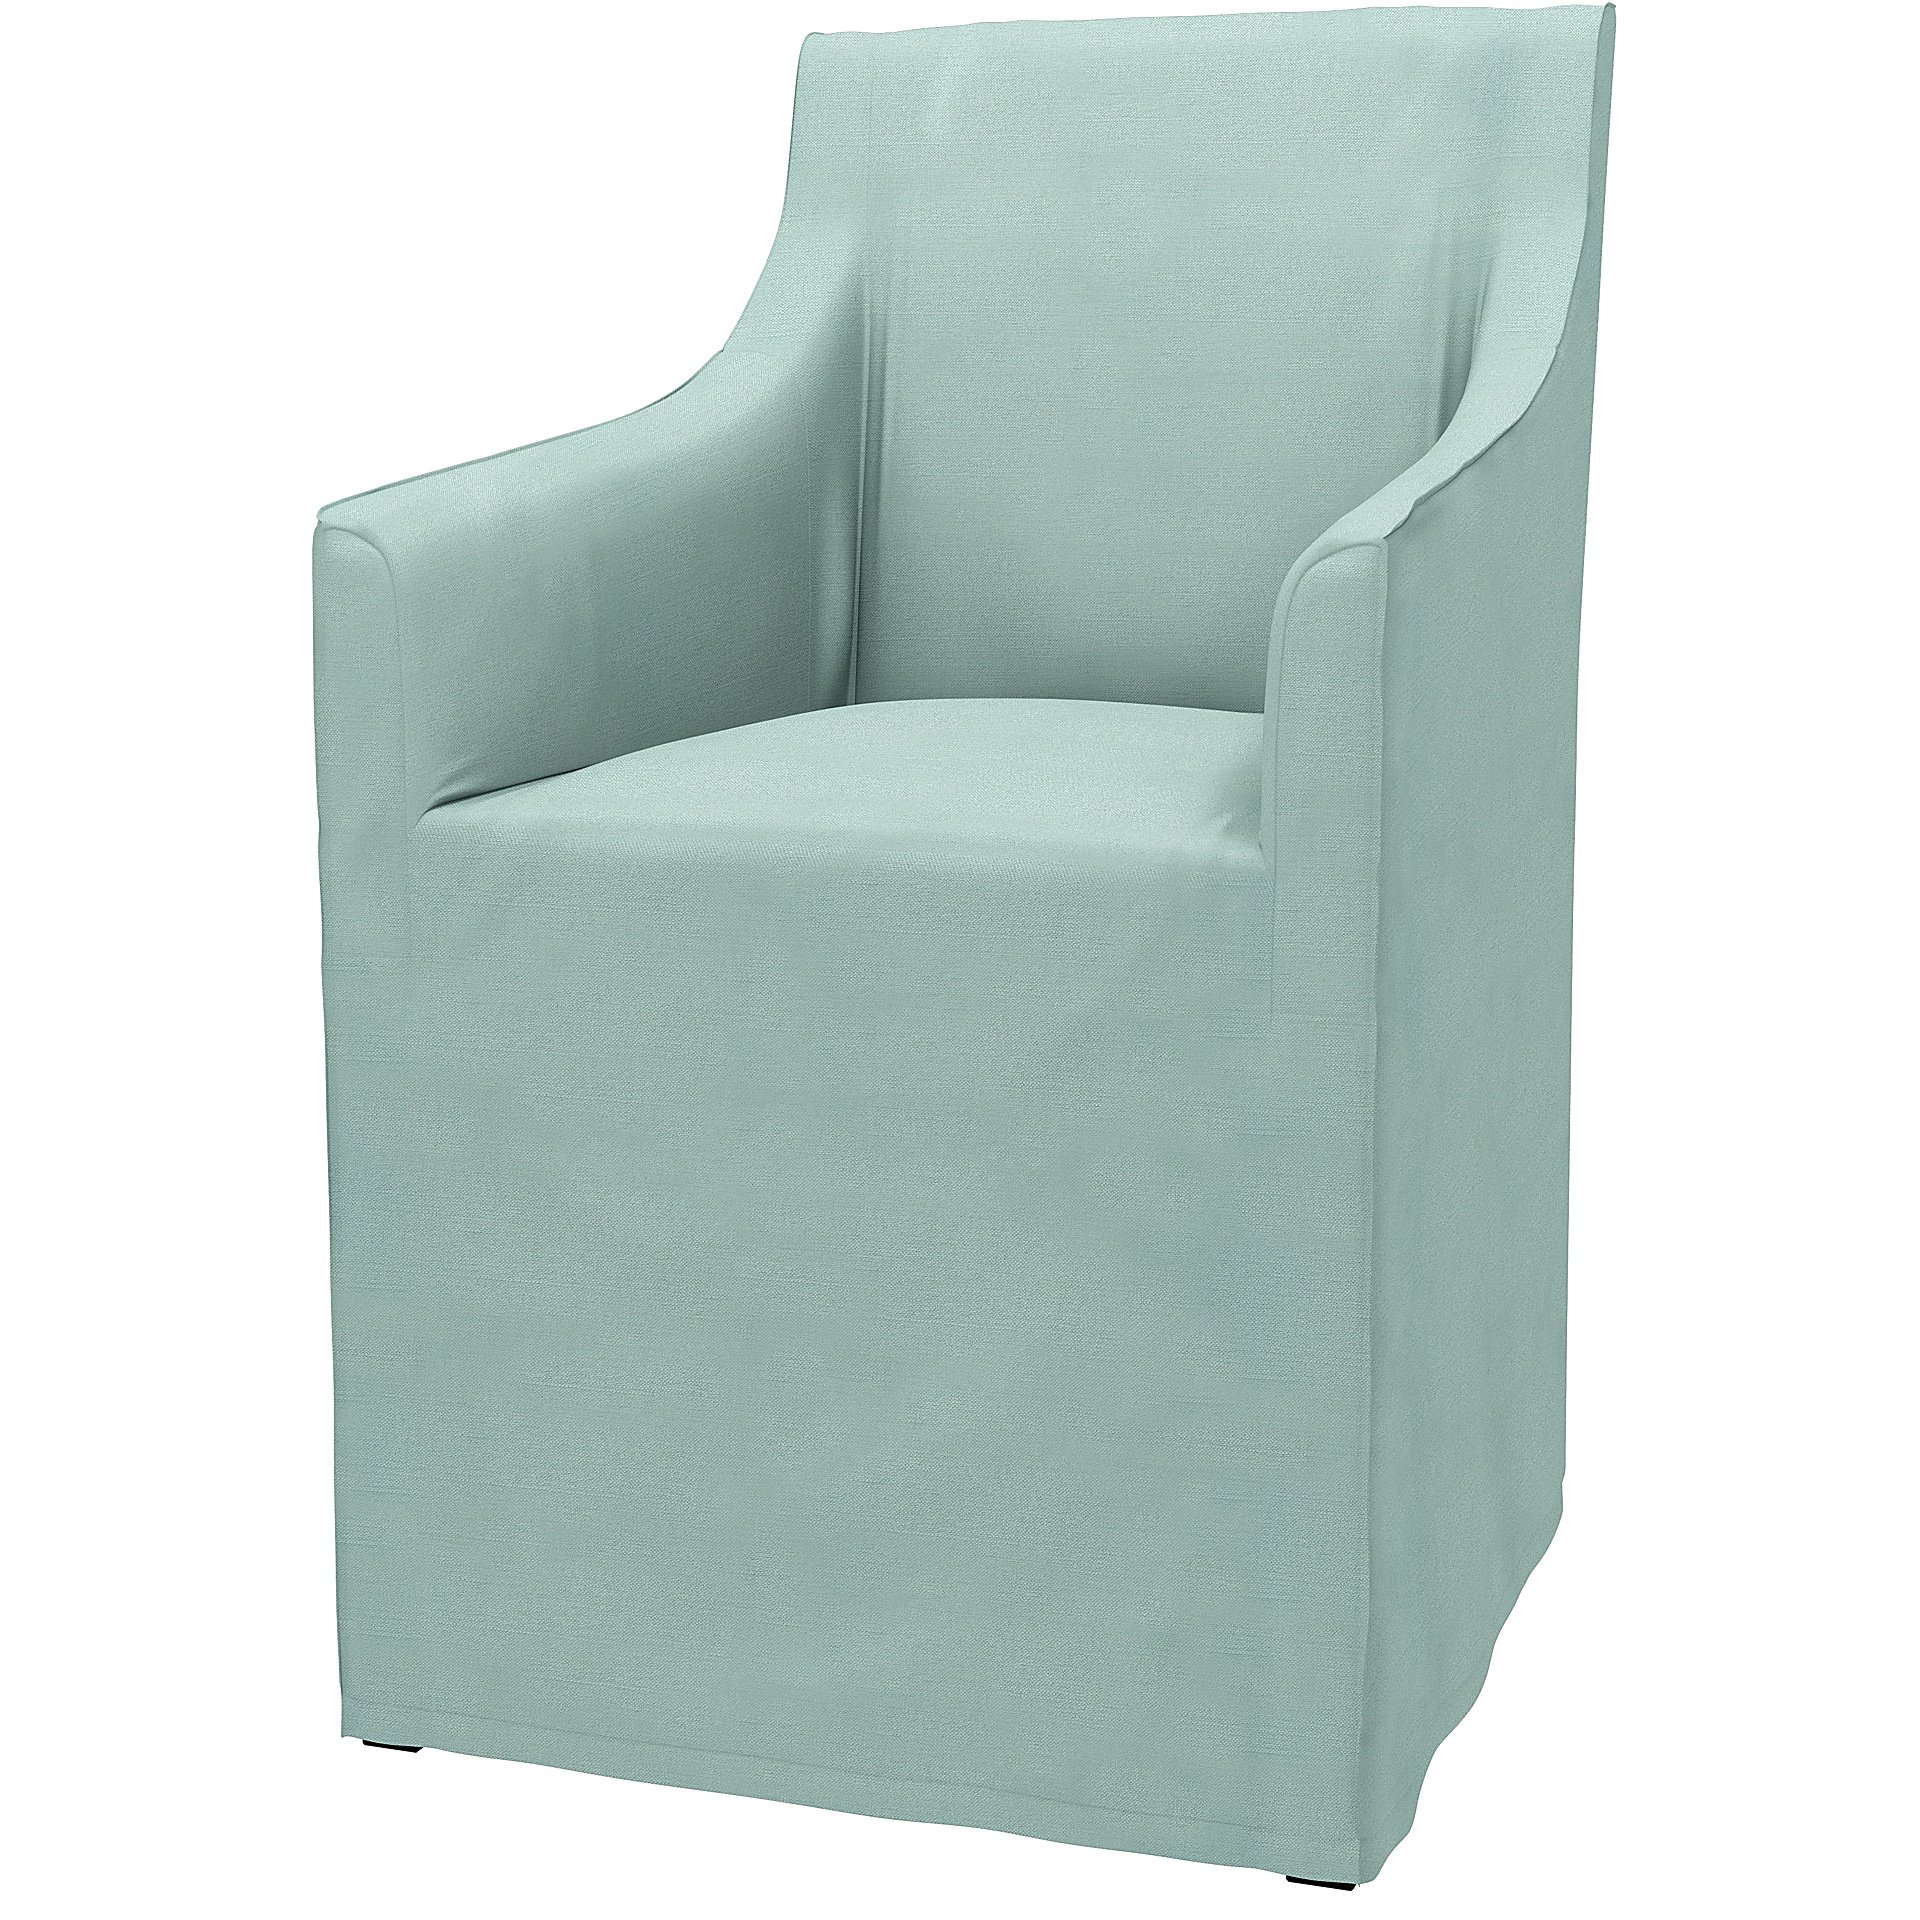 IKEA - Sakarias Chair with Armrests Cover, Mineral Blue, Linen - Bemz